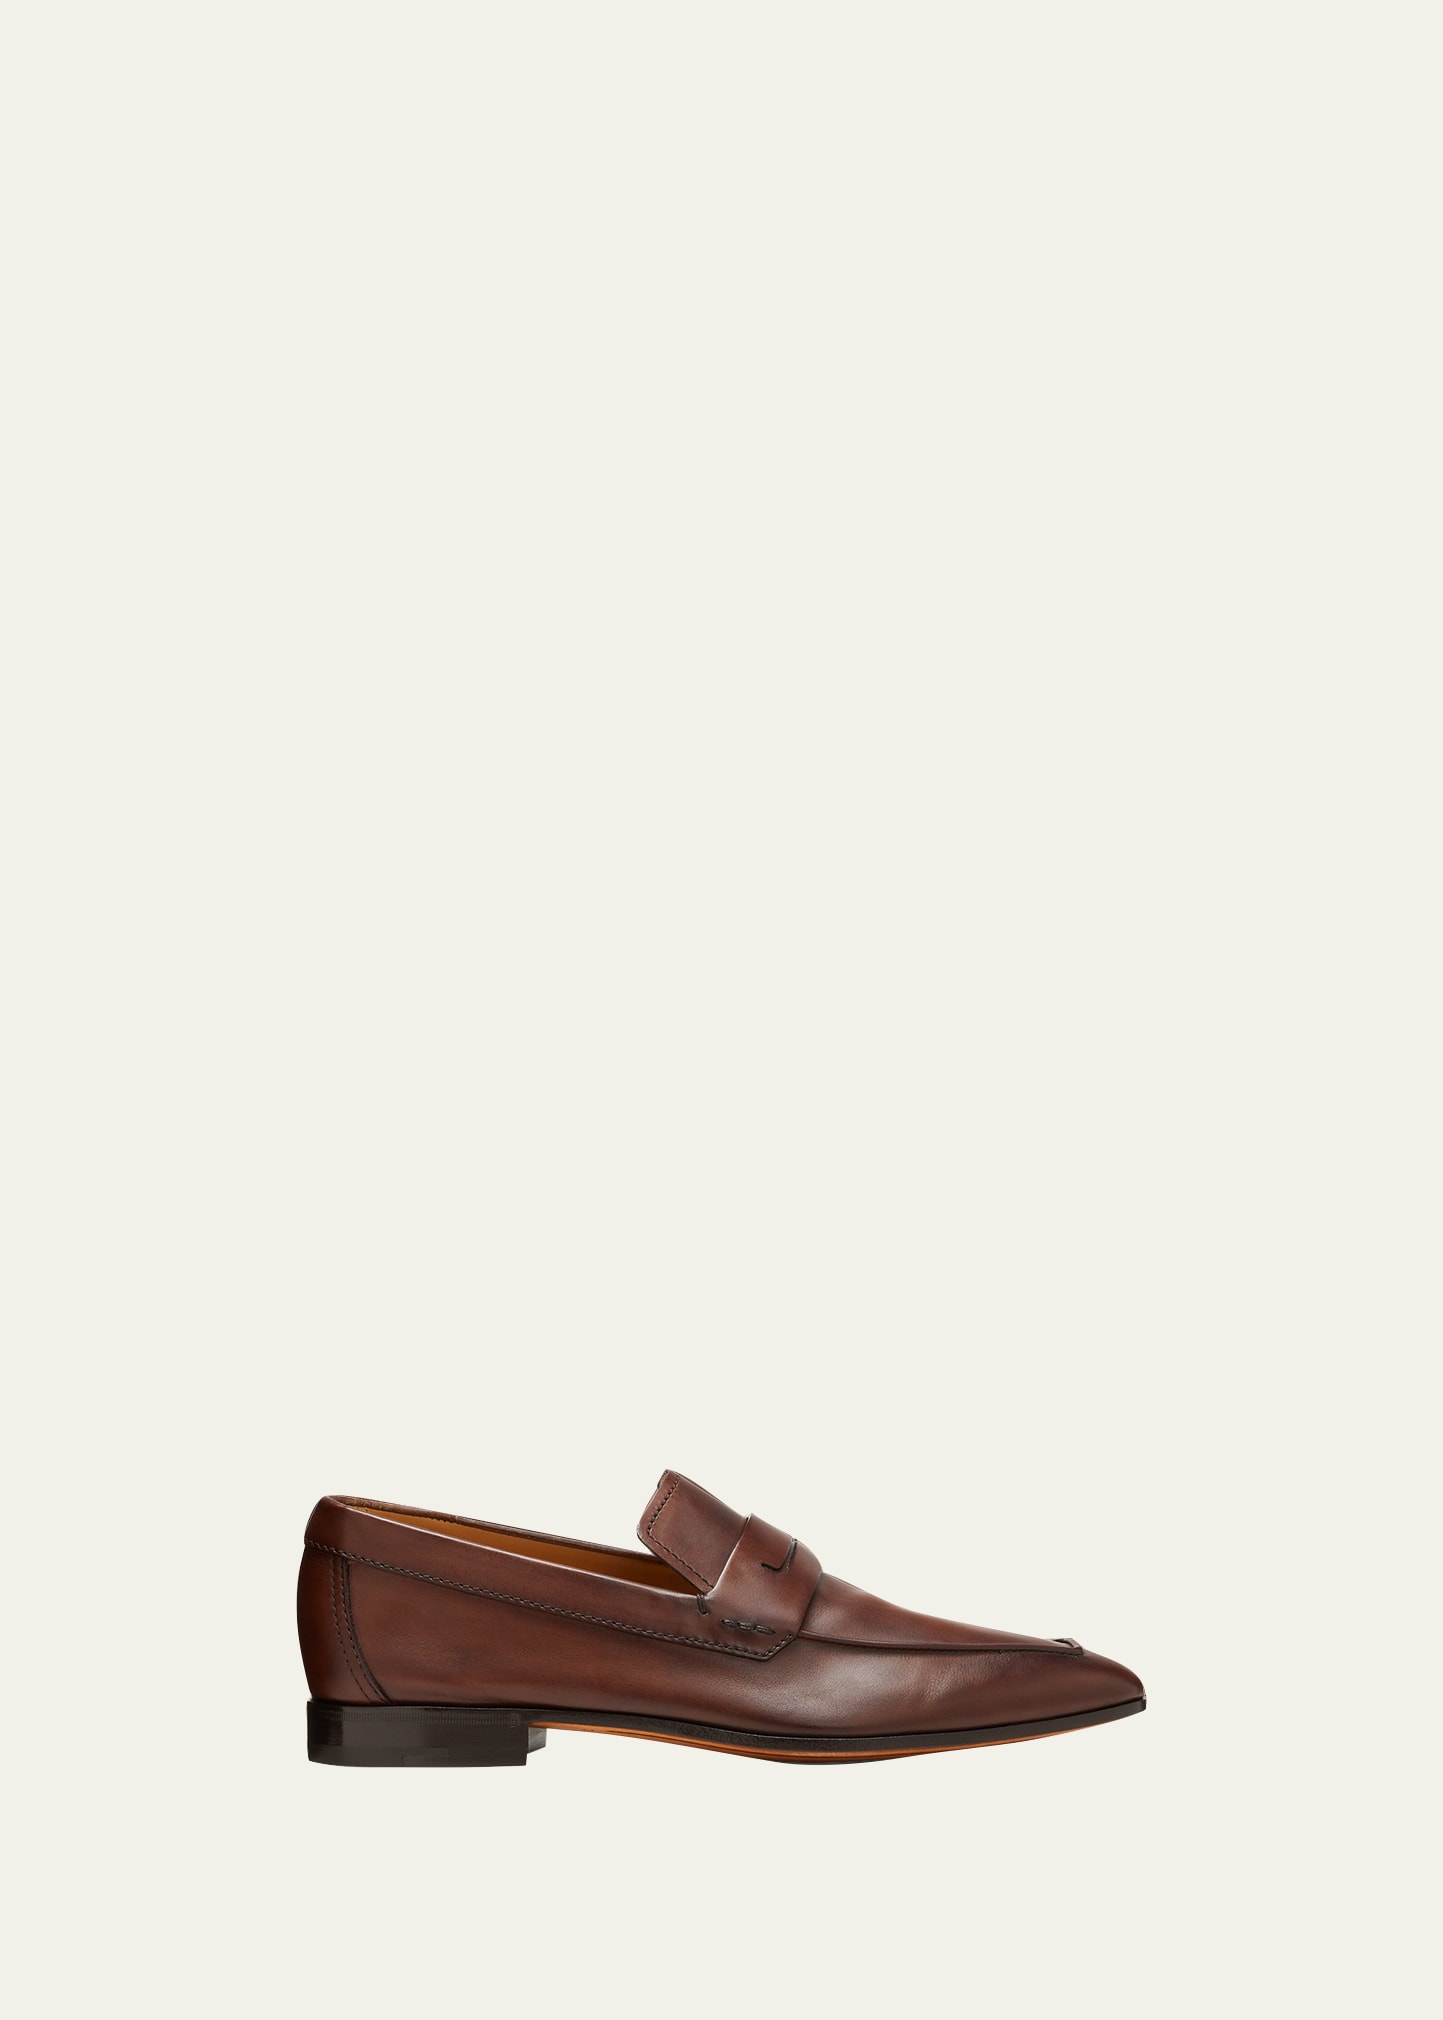 Men's Calf Leather Penny Loafers